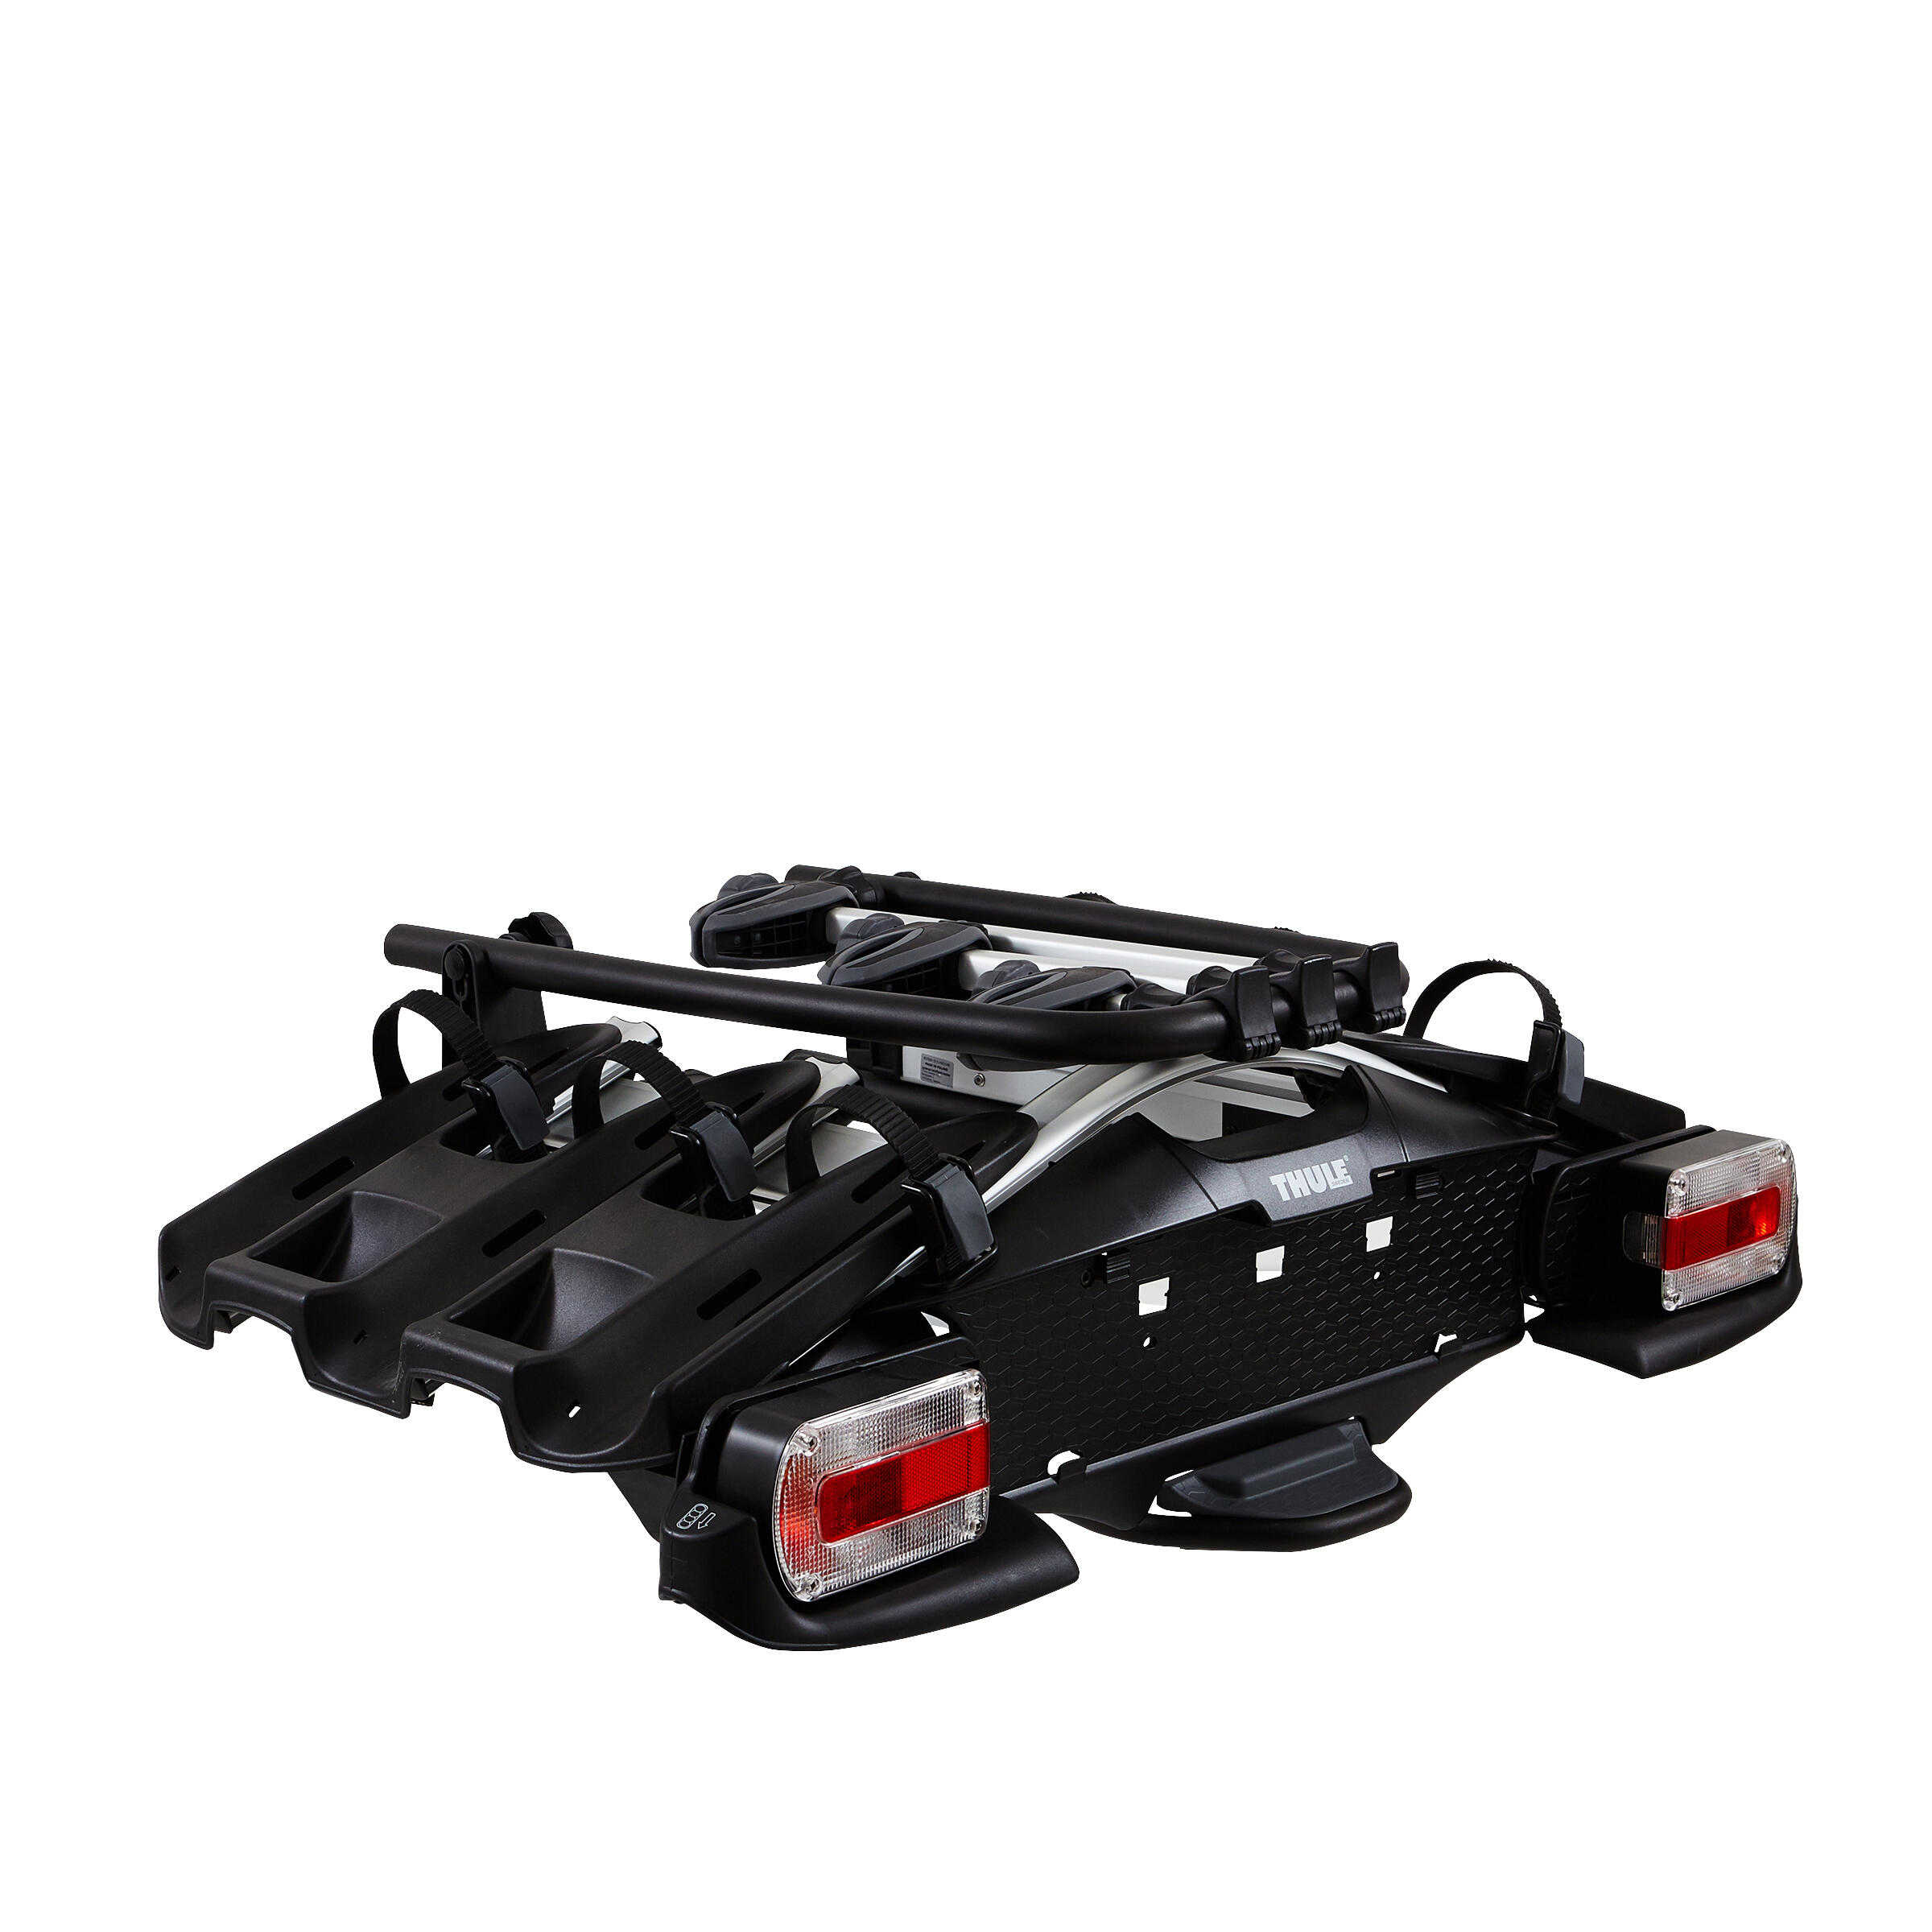 Tow Ball Bike Carrier VeloCompact 927 